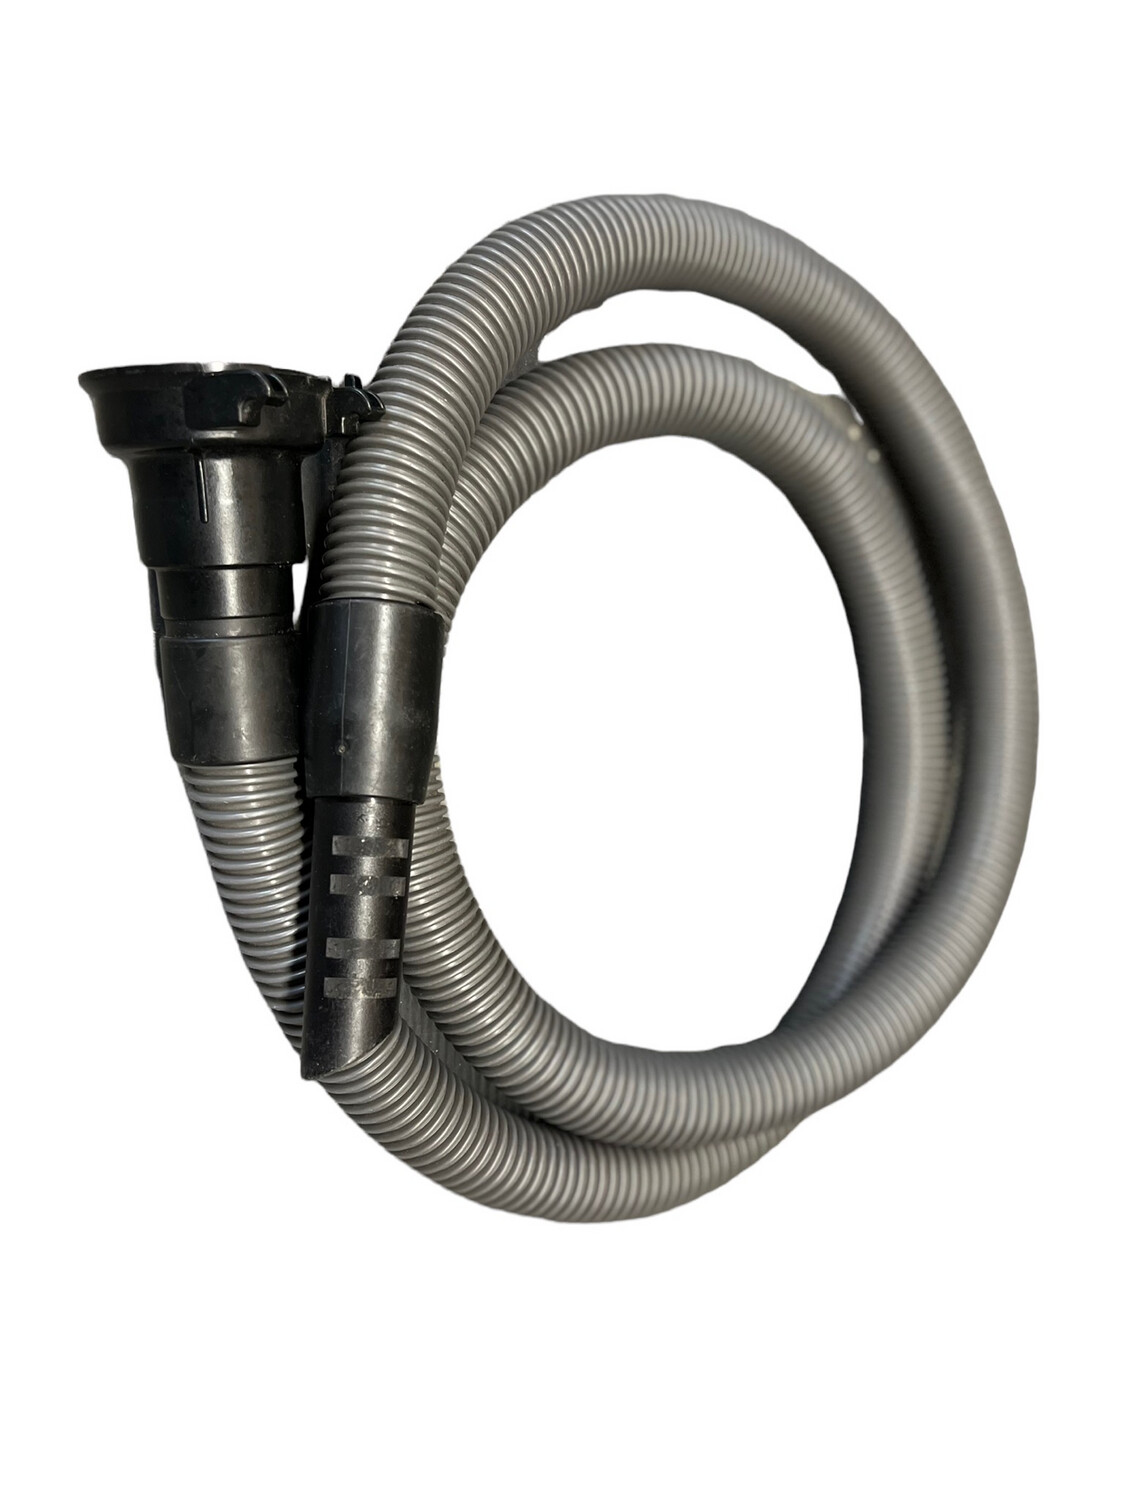 Kirby Vacuum Cleaner Hose Attachment At-210097( Preowned)